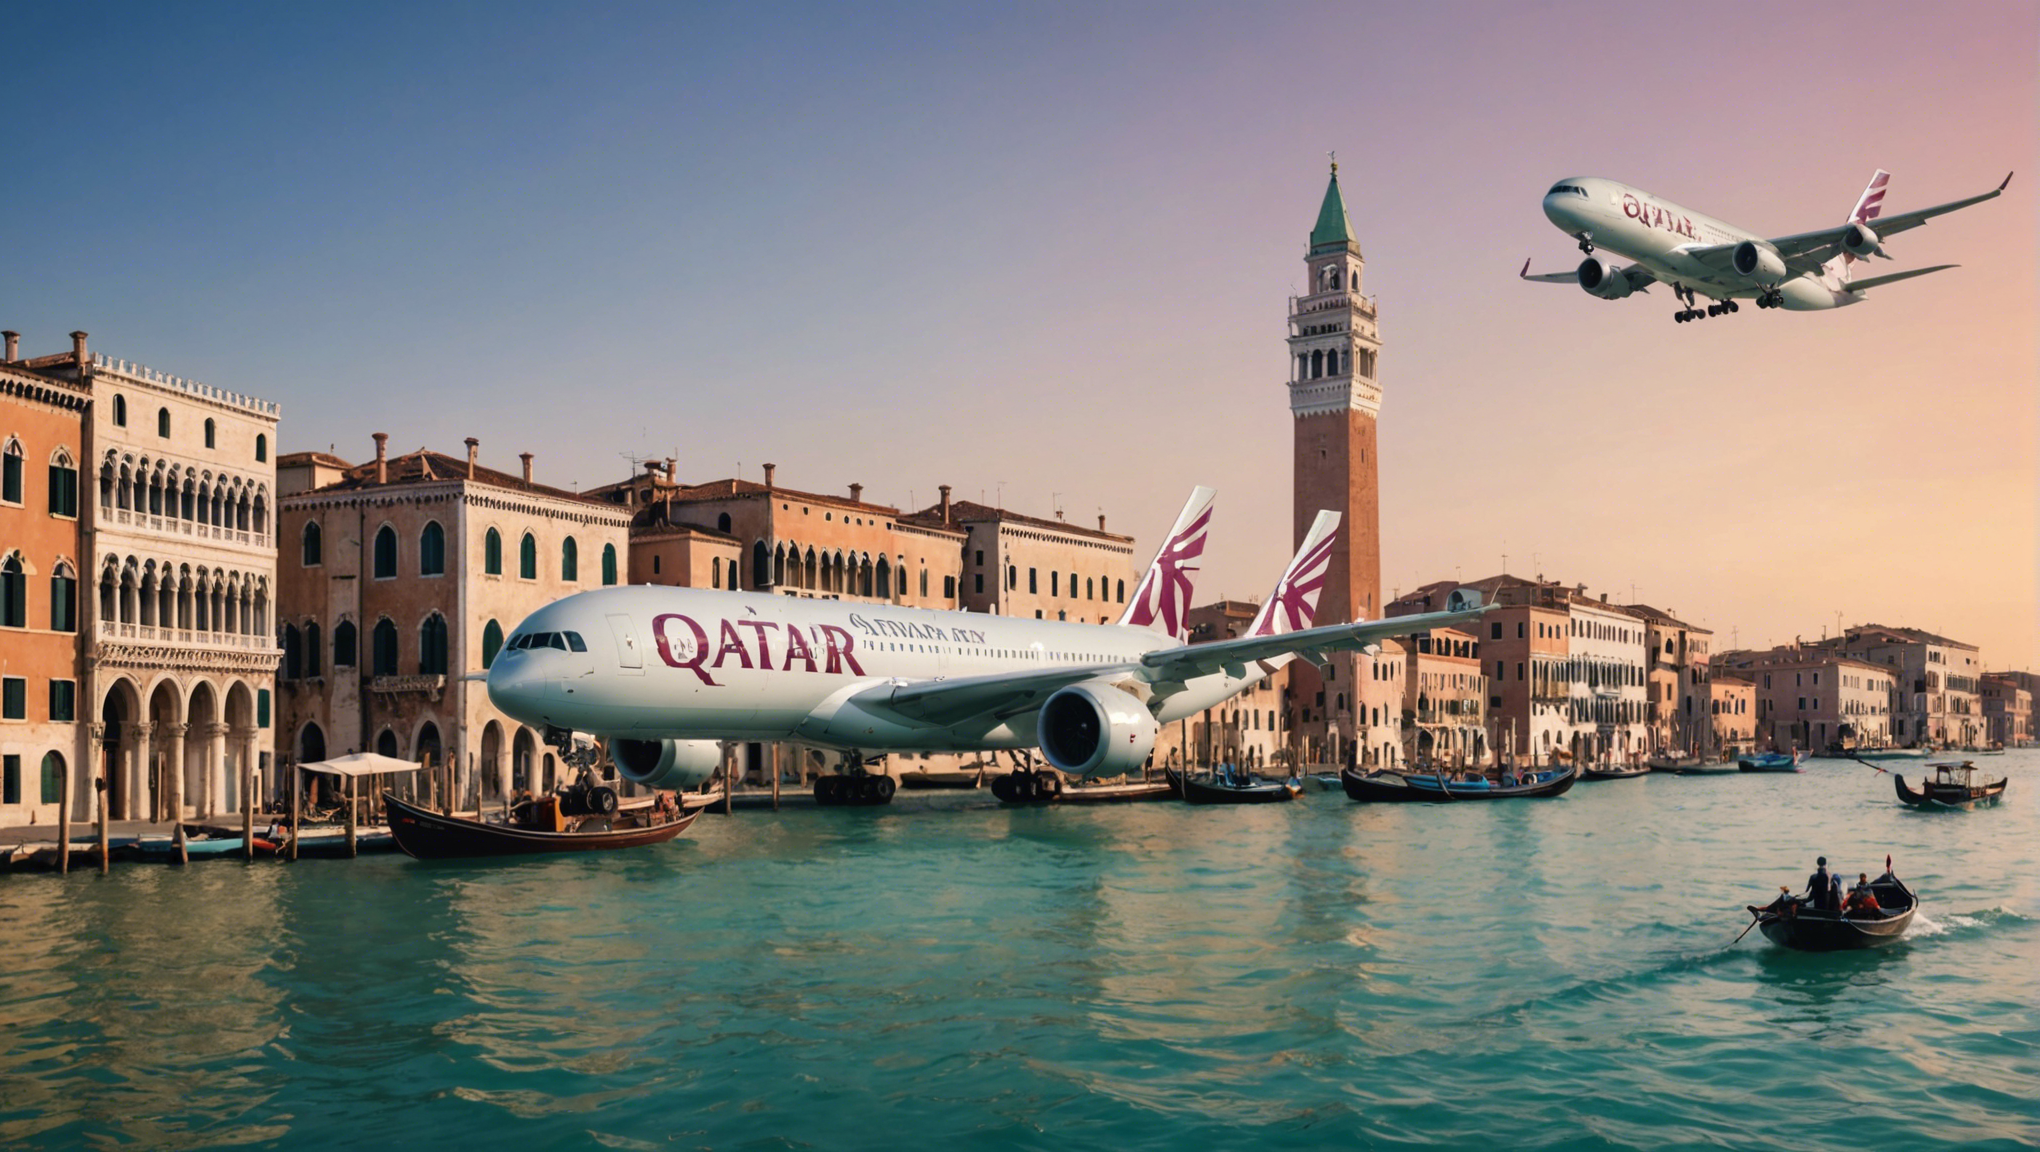 discover flights to venice with qatar airways, a complete range of services for an unforgettable trip.